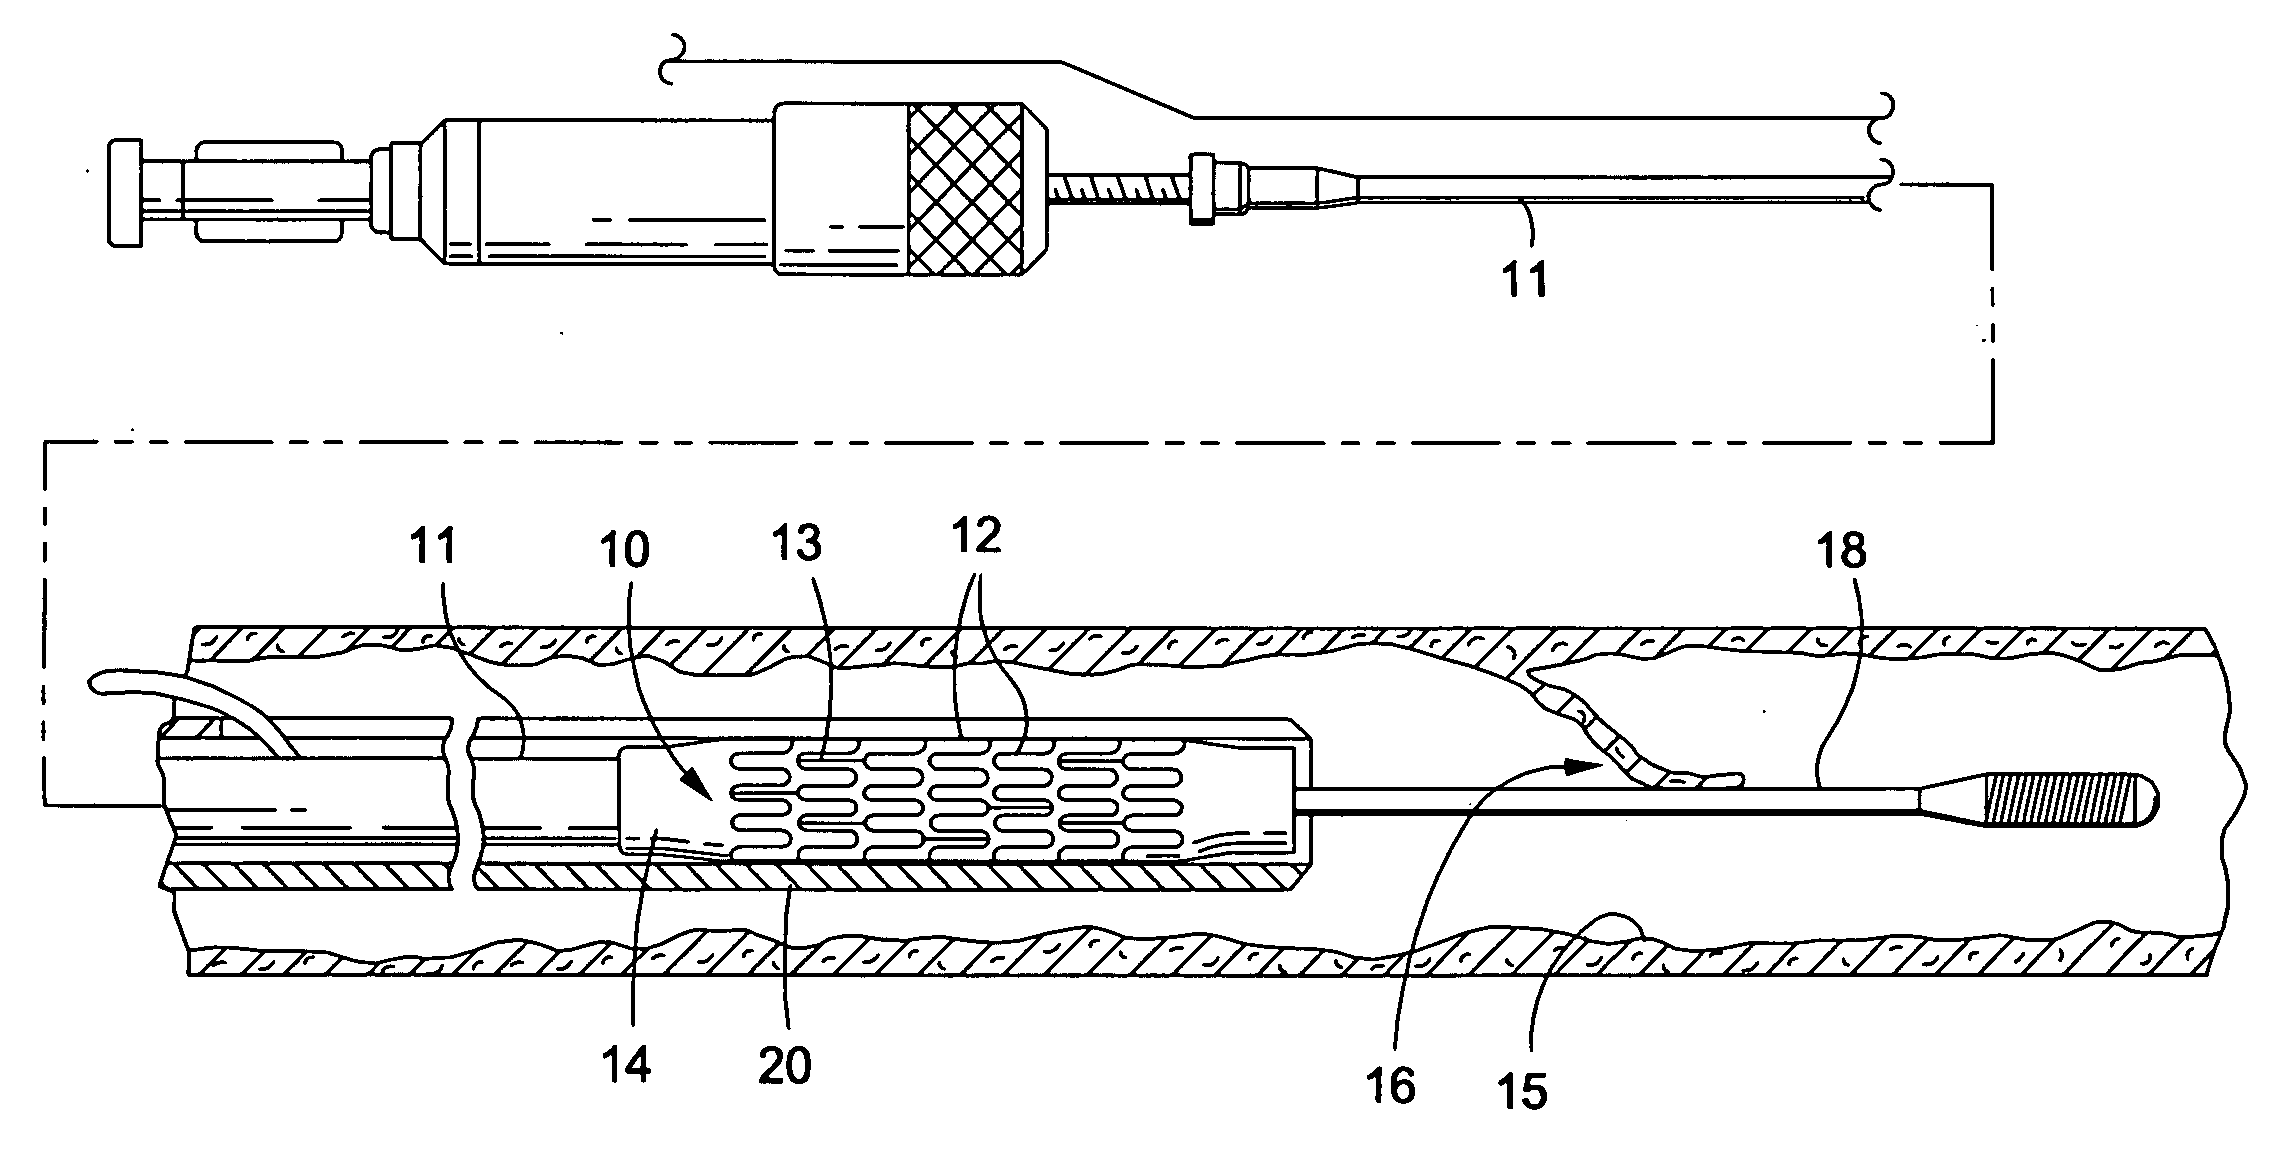 Stent crimping device